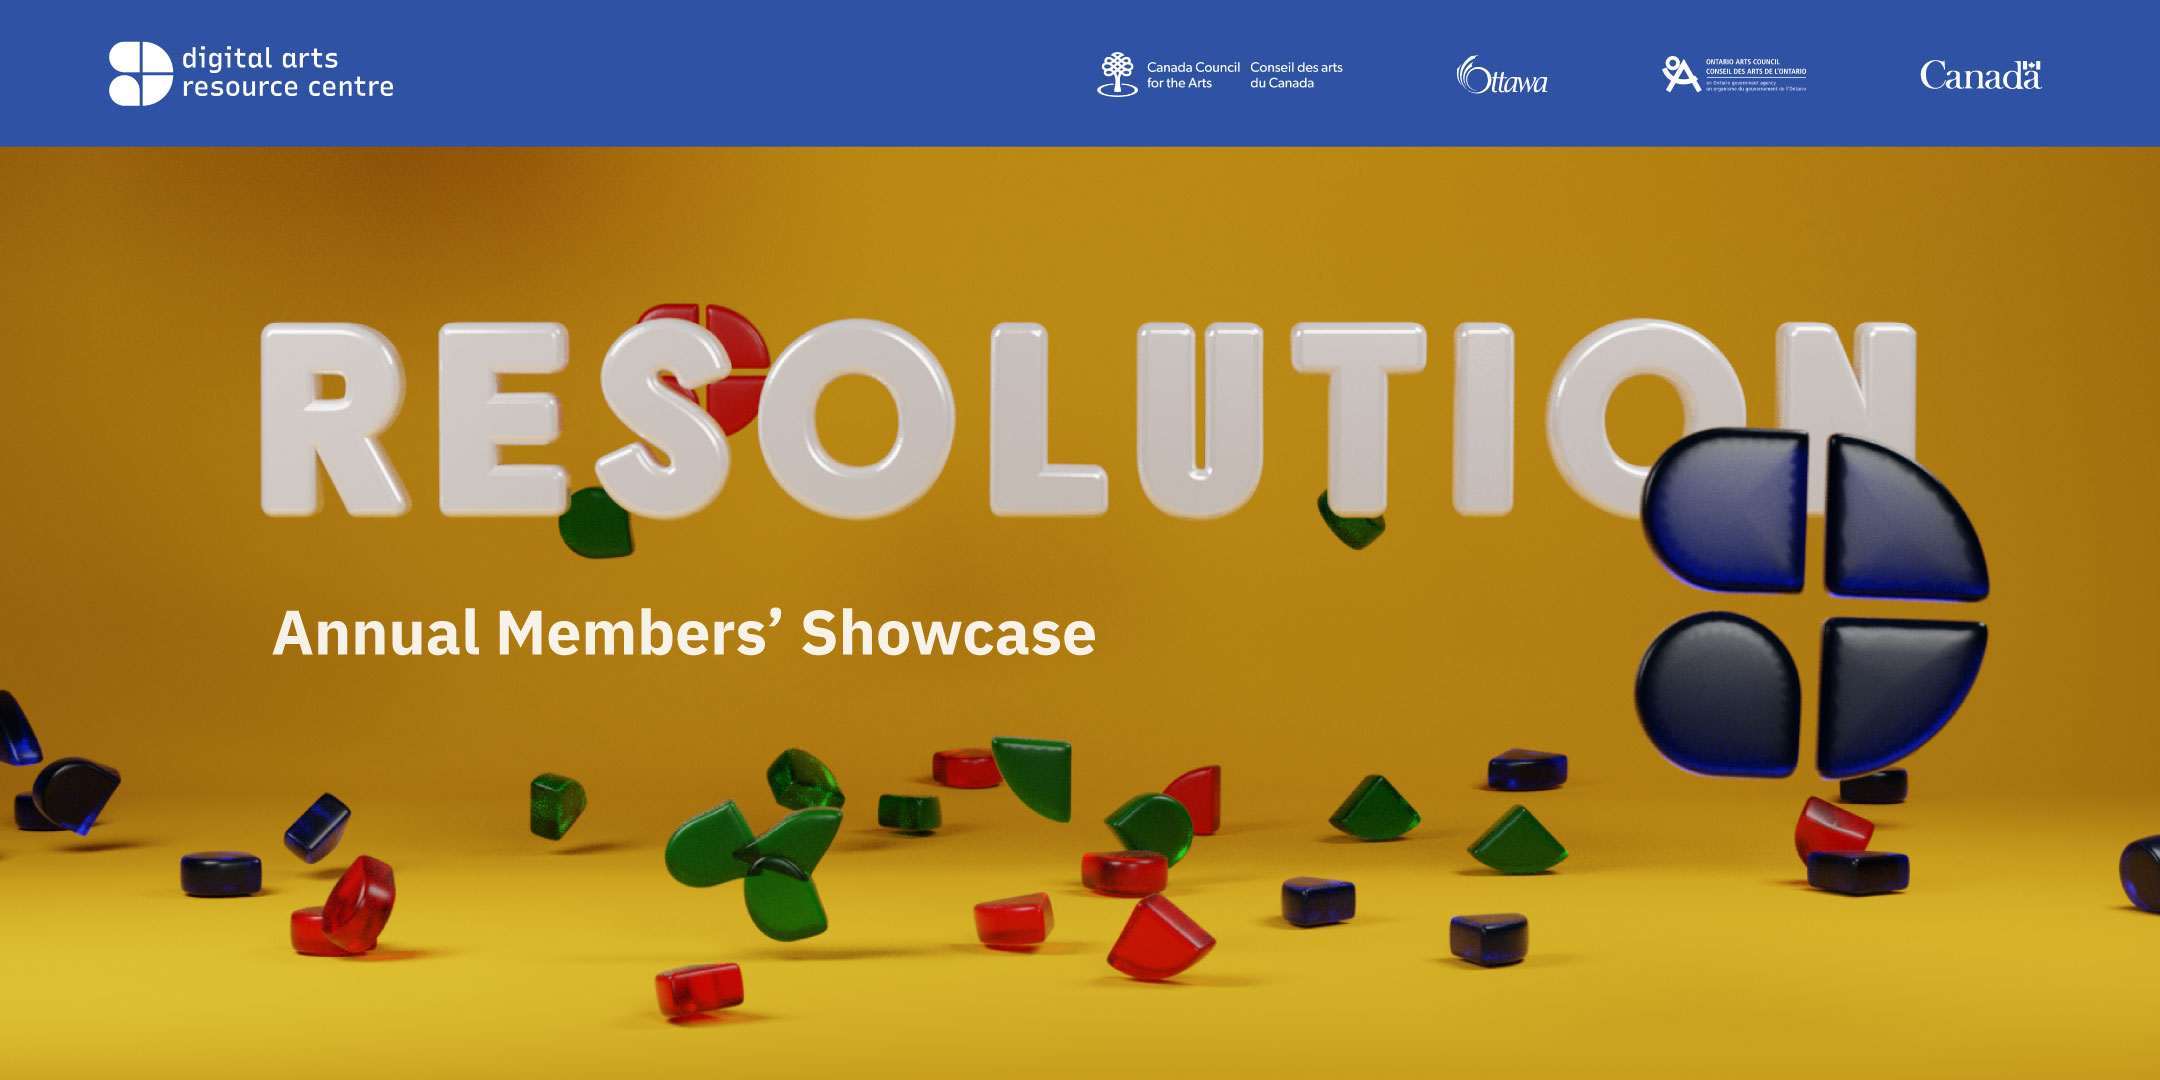 Gum drops in the shape of the DARC logo fall from the sky against a yellow background and collide with glossy lettering that spell out "Resolution"